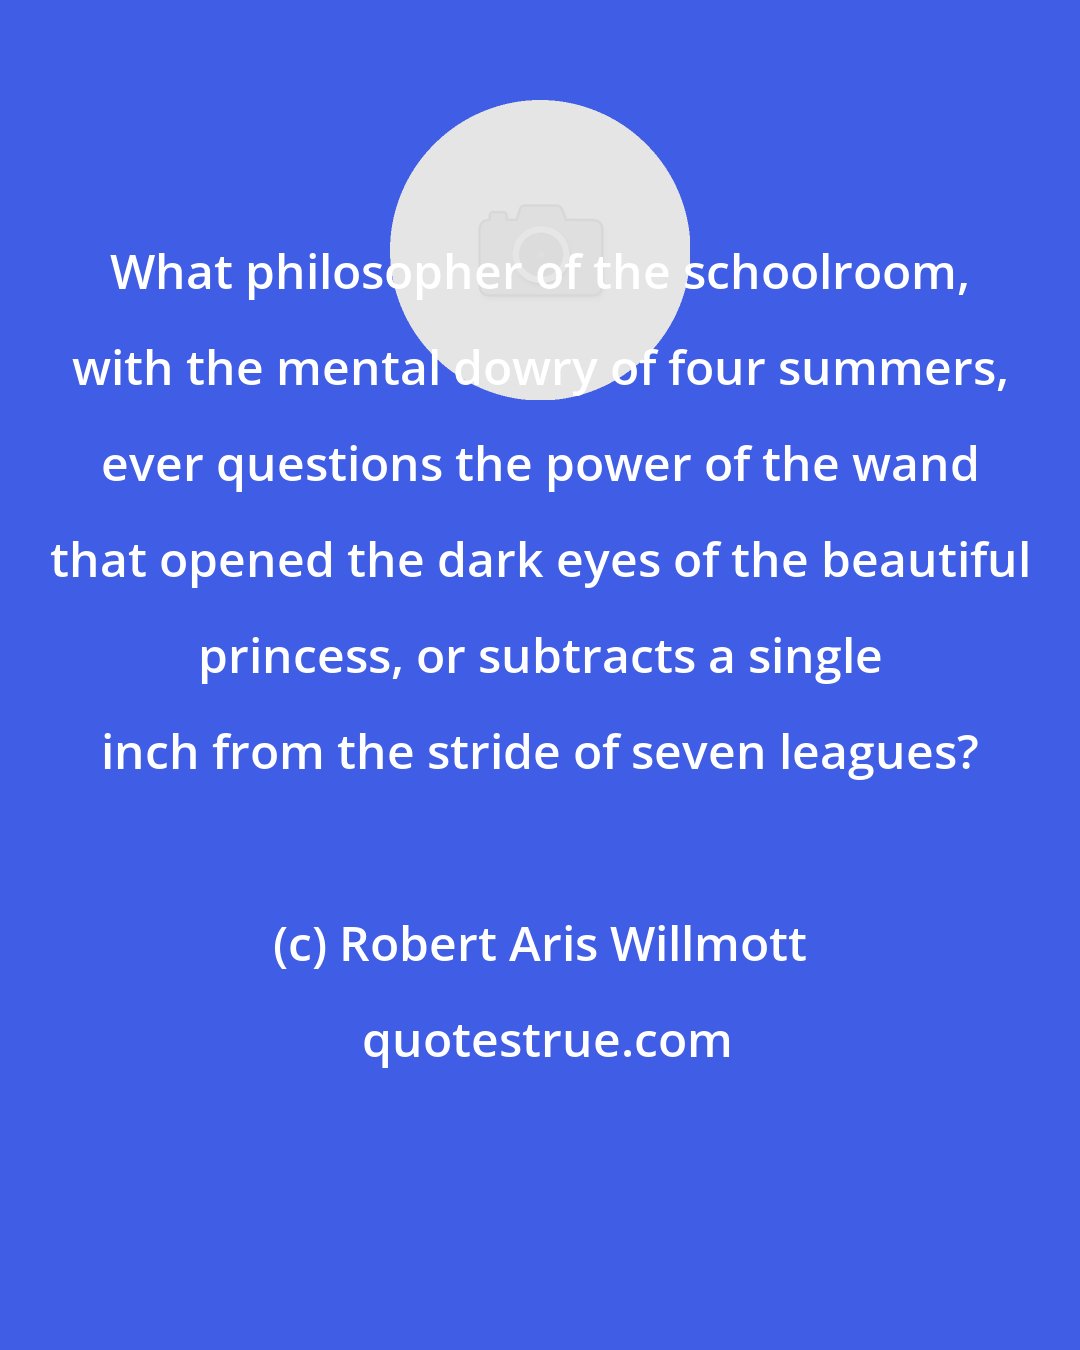 Robert Aris Willmott: What philosopher of the schoolroom, with the mental dowry of four summers, ever questions the power of the wand that opened the dark eyes of the beautiful princess, or subtracts a single inch from the stride of seven leagues?